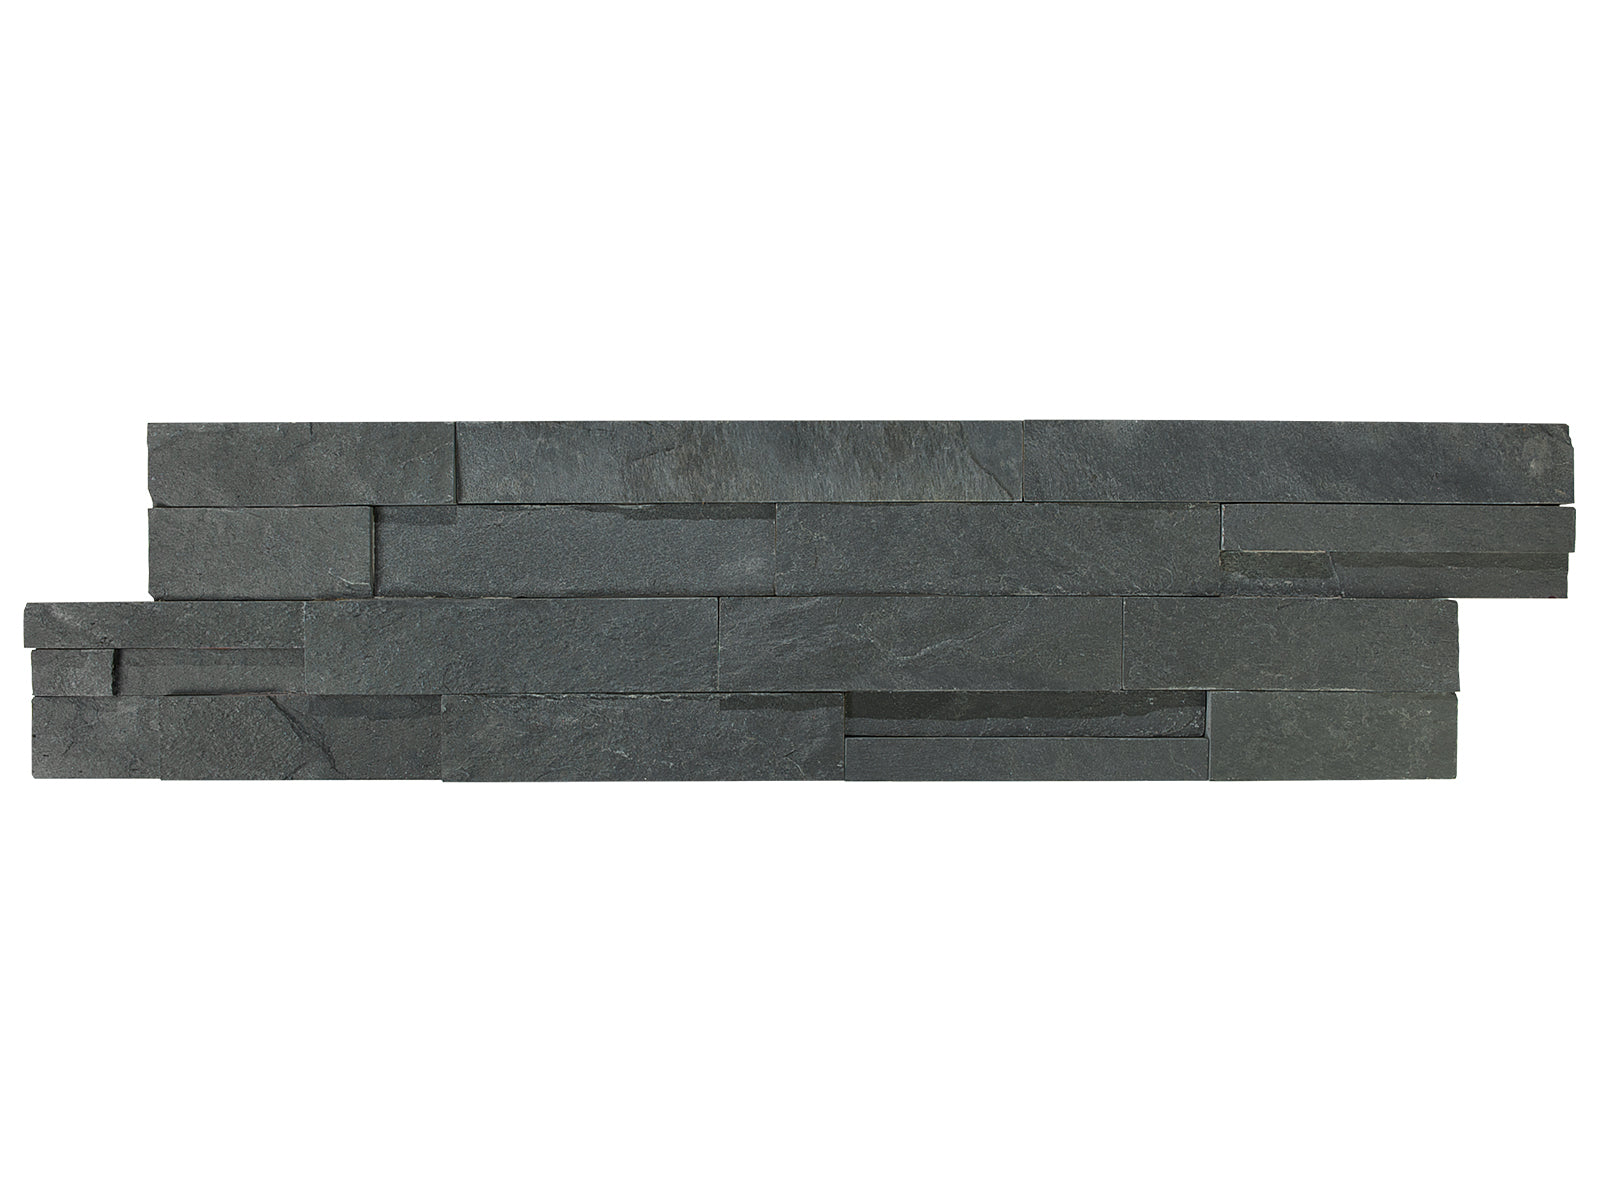 BUY ONLINE: Cubics Stark Carbon Marble Wall Panel